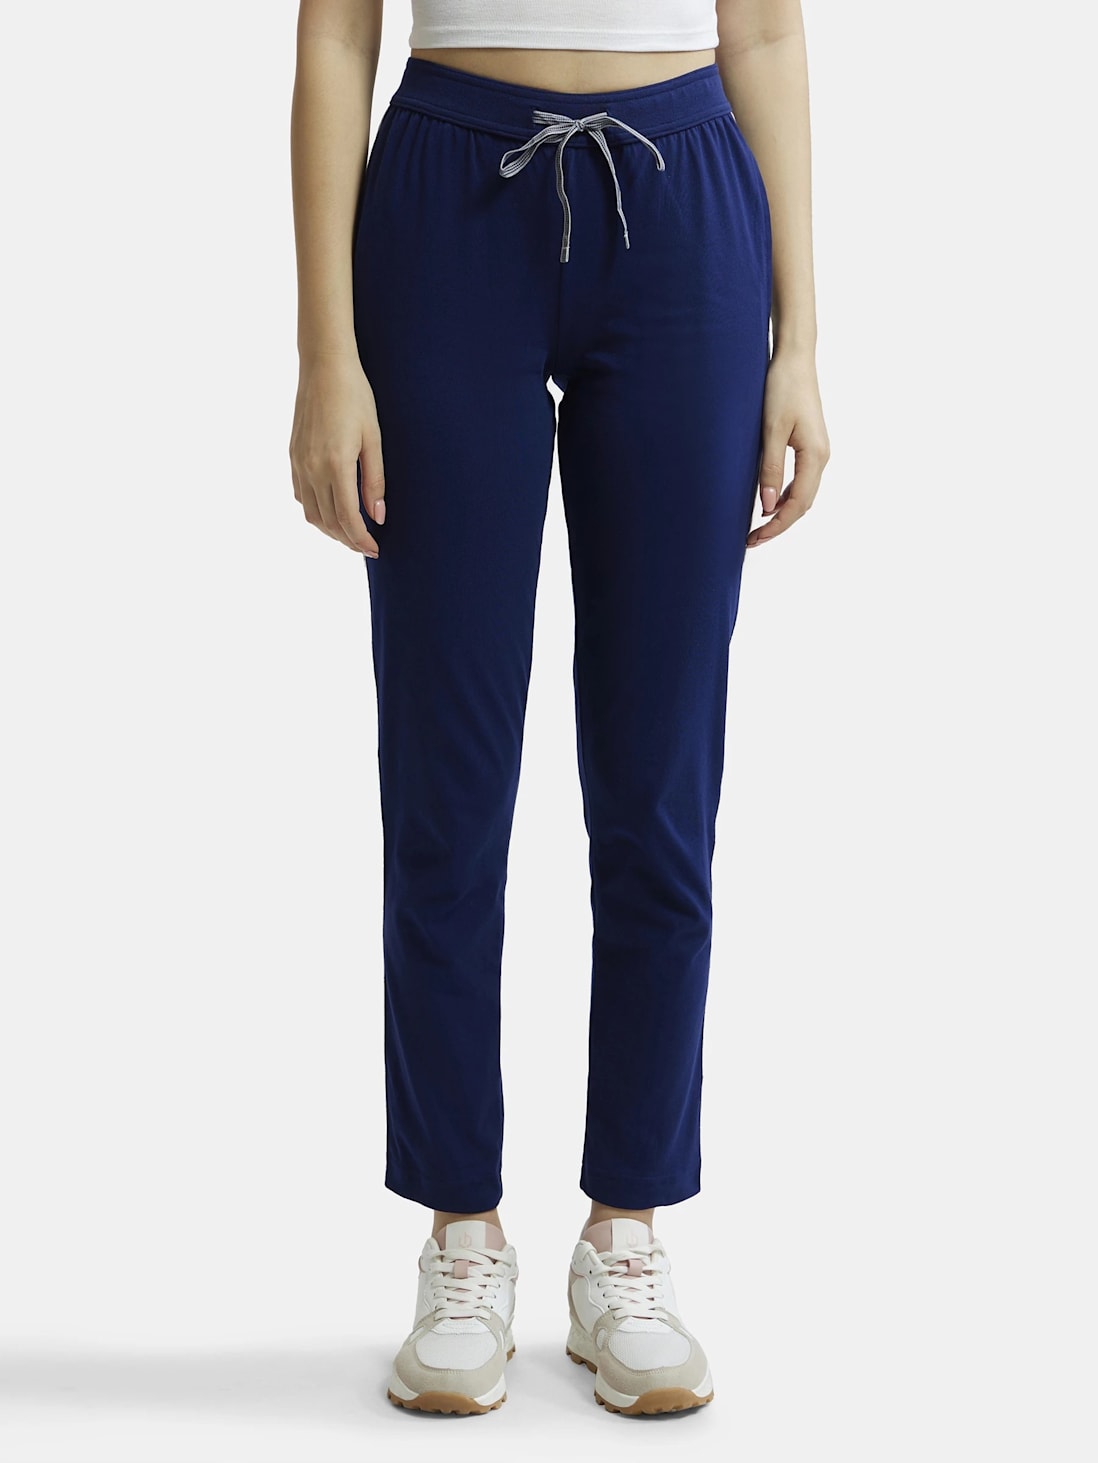 Jockey Women's Cotton Contrast Side Piping and Pockets Track pant -1305 –  Online Shopping site in India